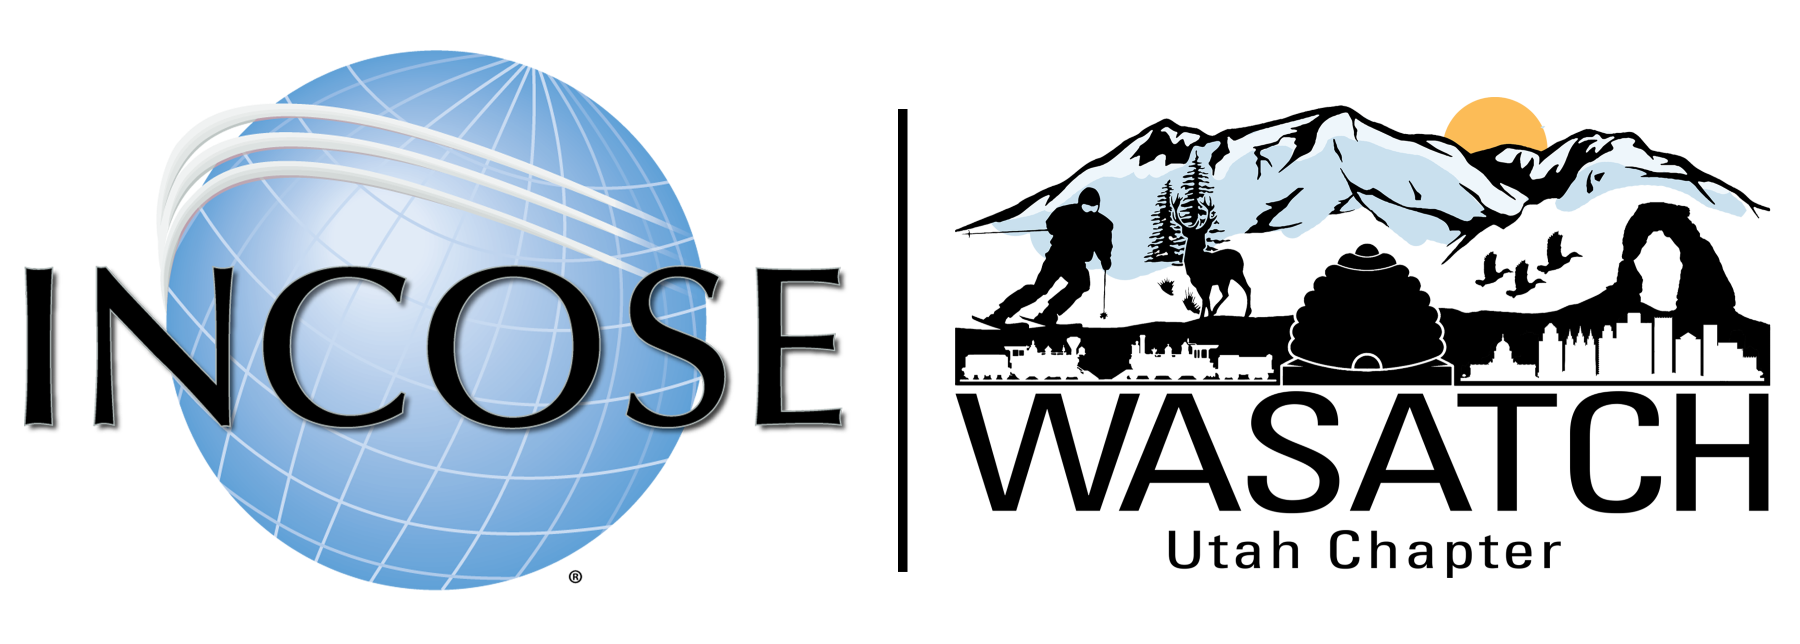 incose-wasatch-logo_compressed